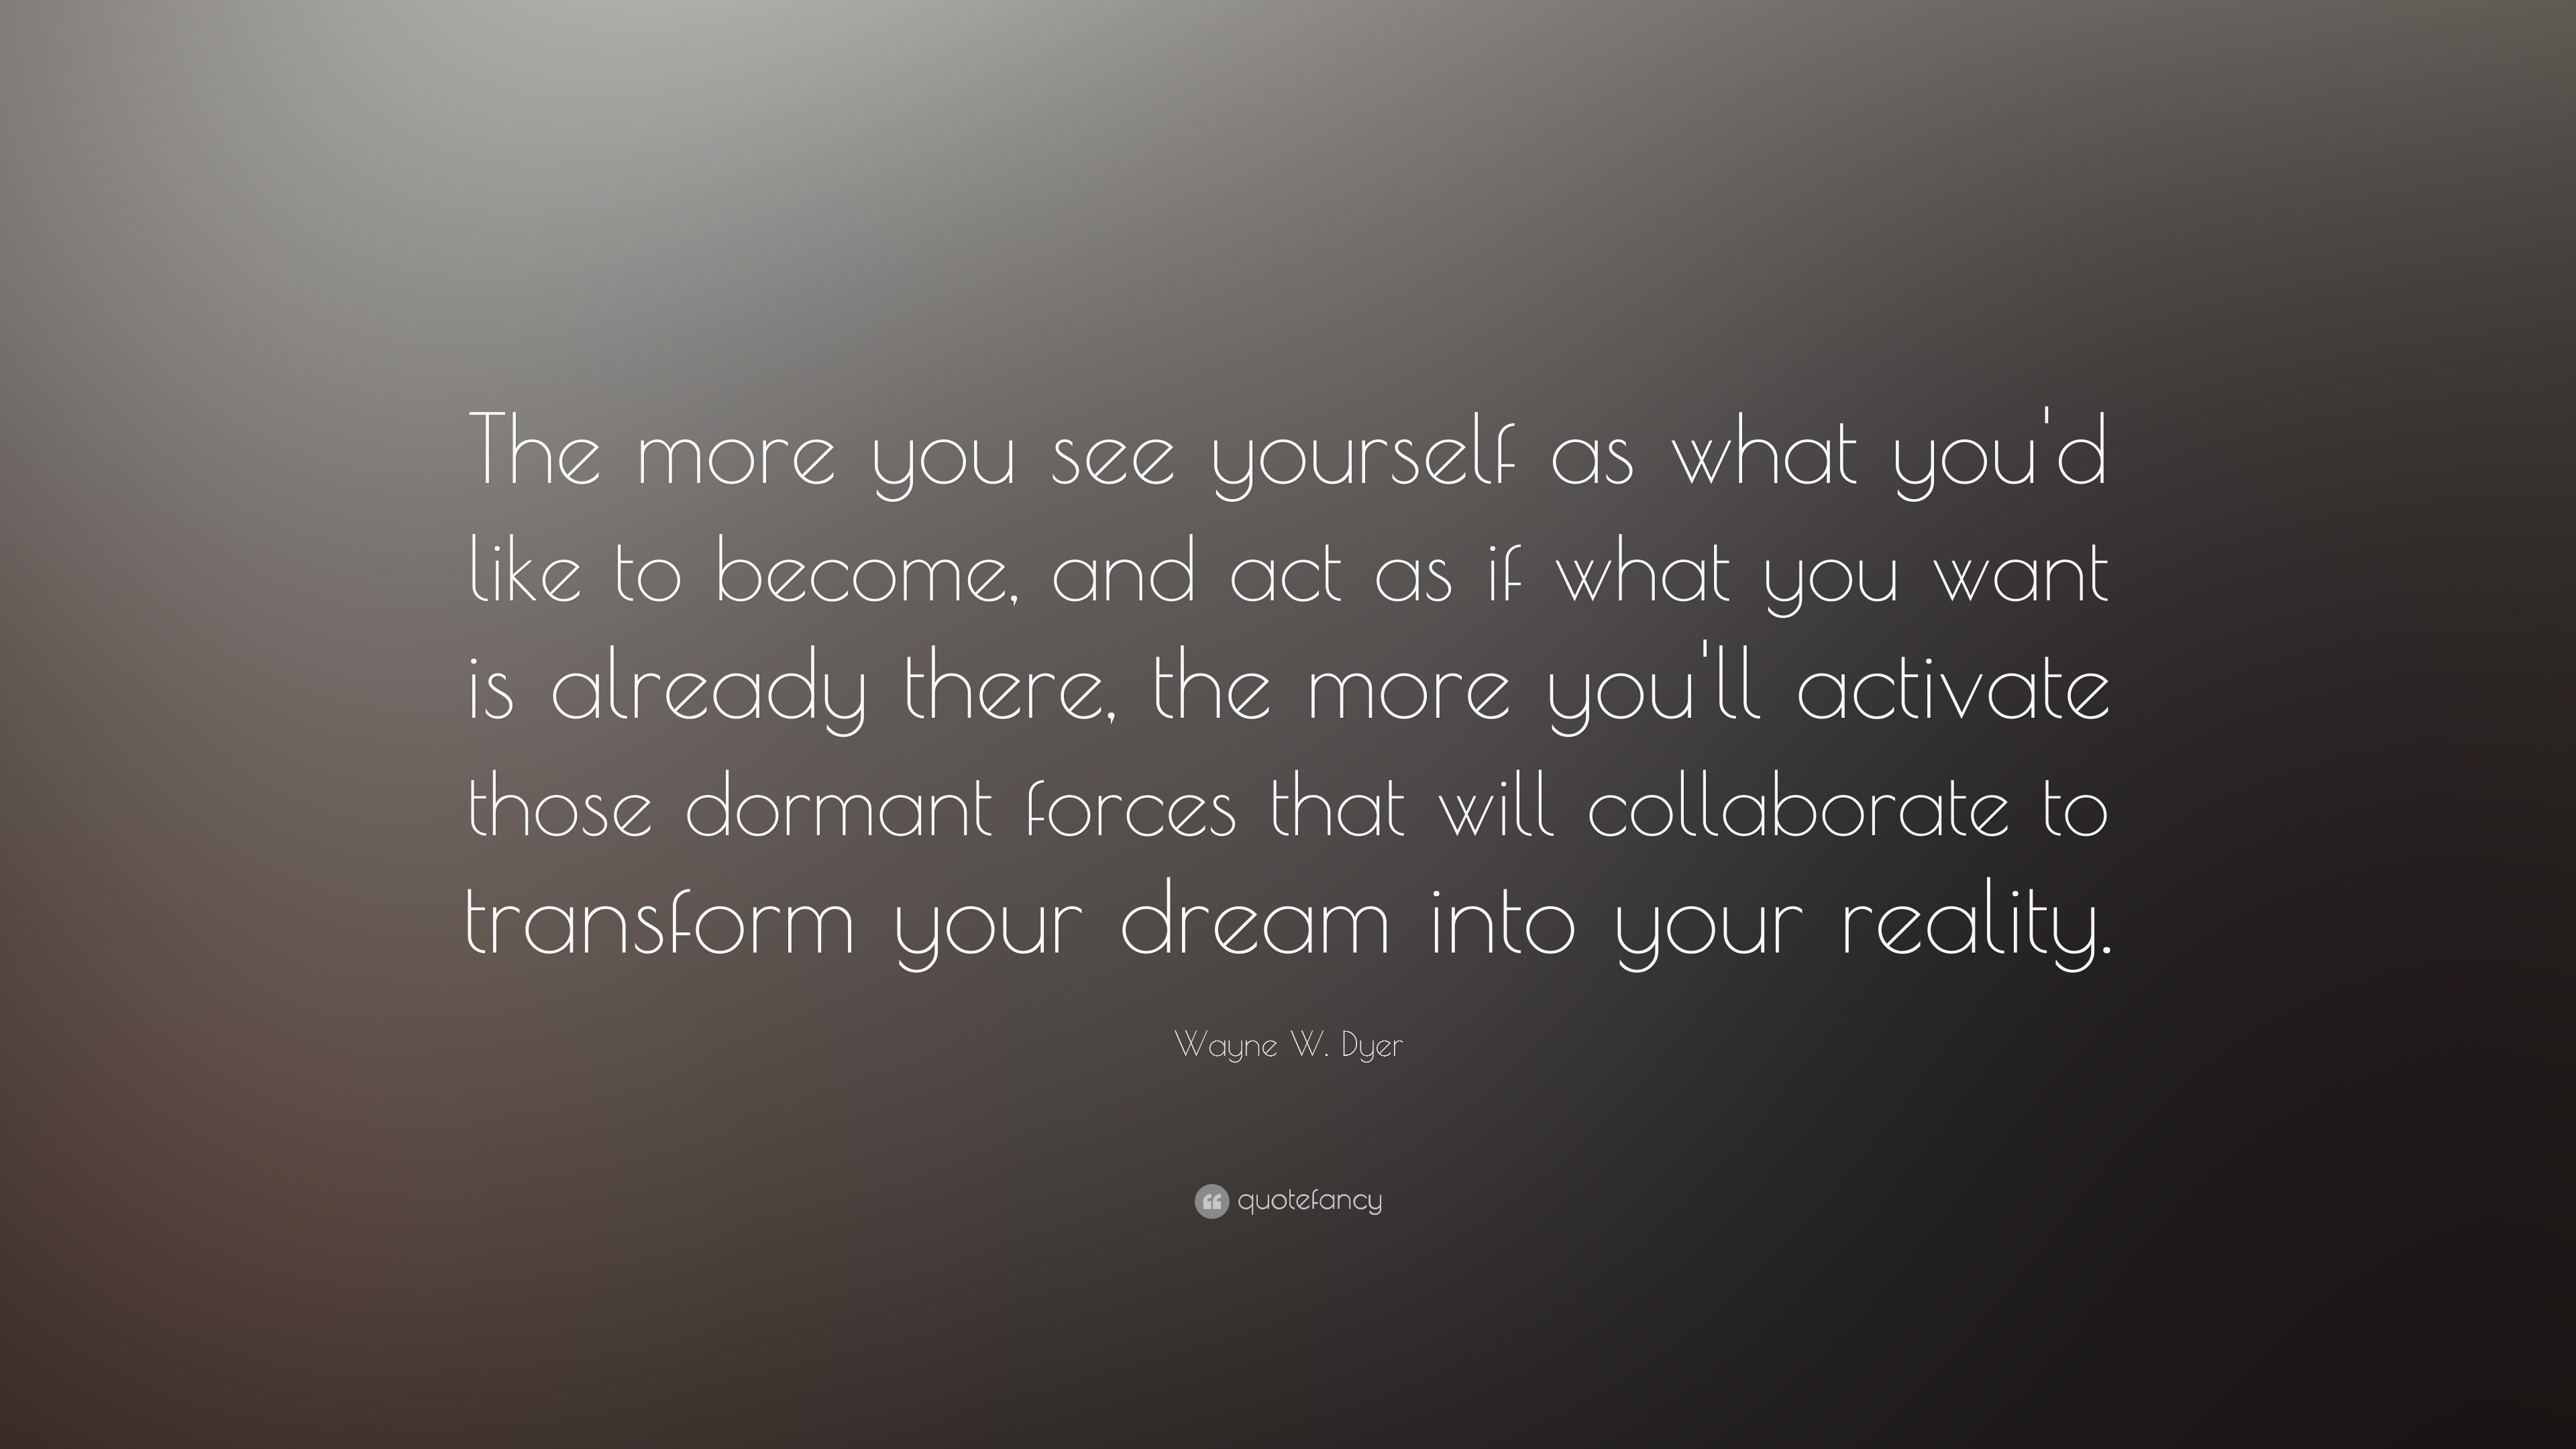 Wayne W. Dyer Quote: “The more you see yourself as what you'd like to ...